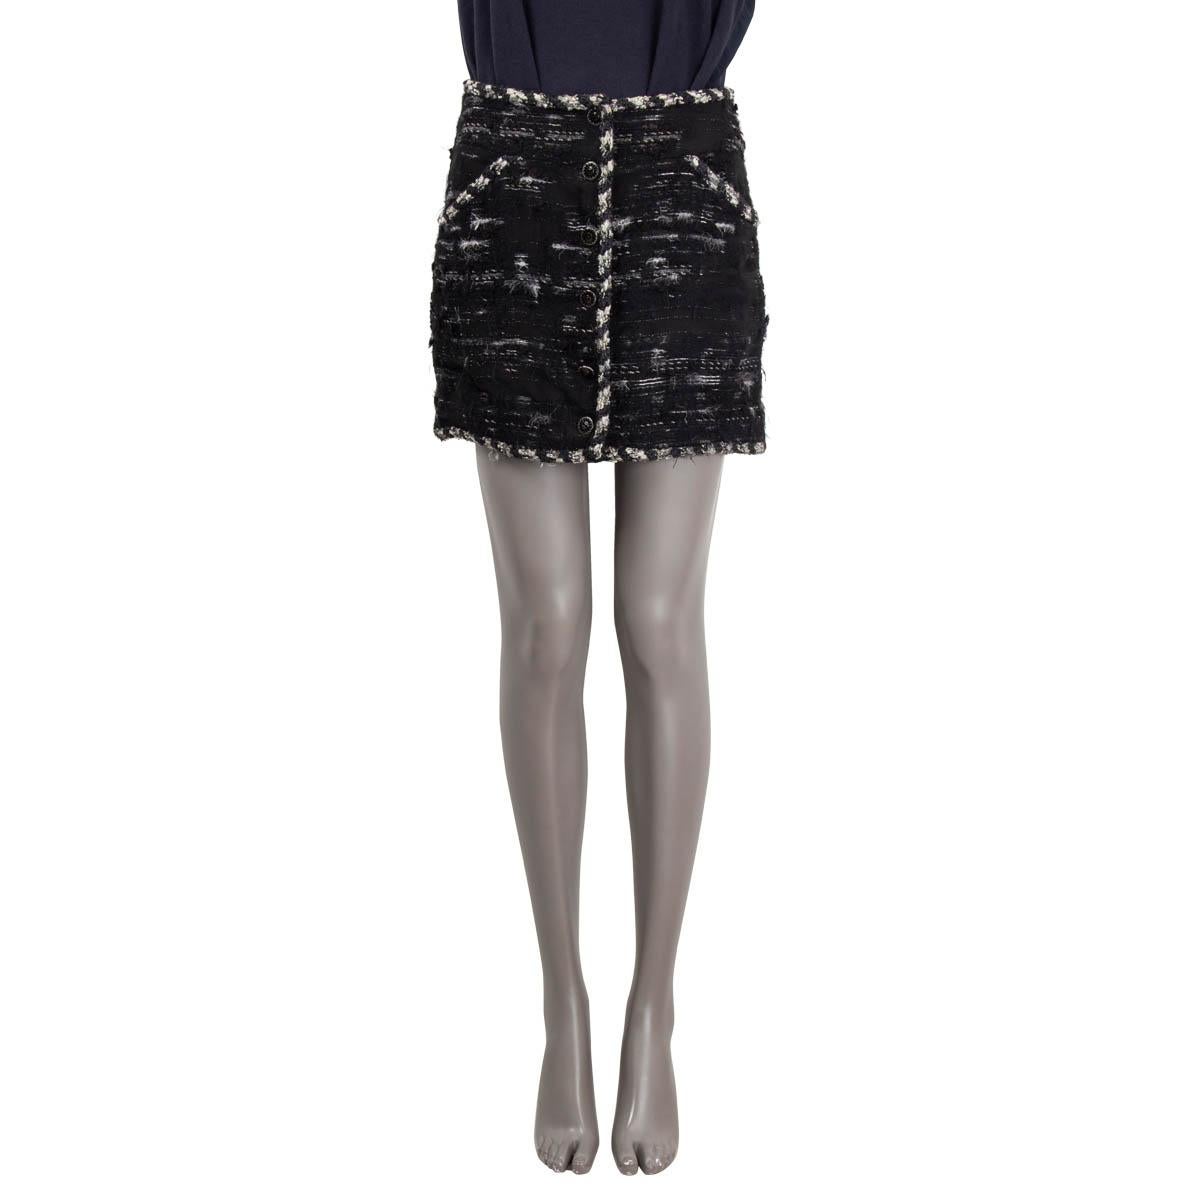 100% authentic Chanel  tweed mini skirt in black polyamide (22%), wool (20%), acrylic (19%), mohair (19%), silk (12%), polyester (3%), viscose (3%), cotton (1%) and rayon (1%). Features a braided trim, black enamel CC buttons and two slant pockets